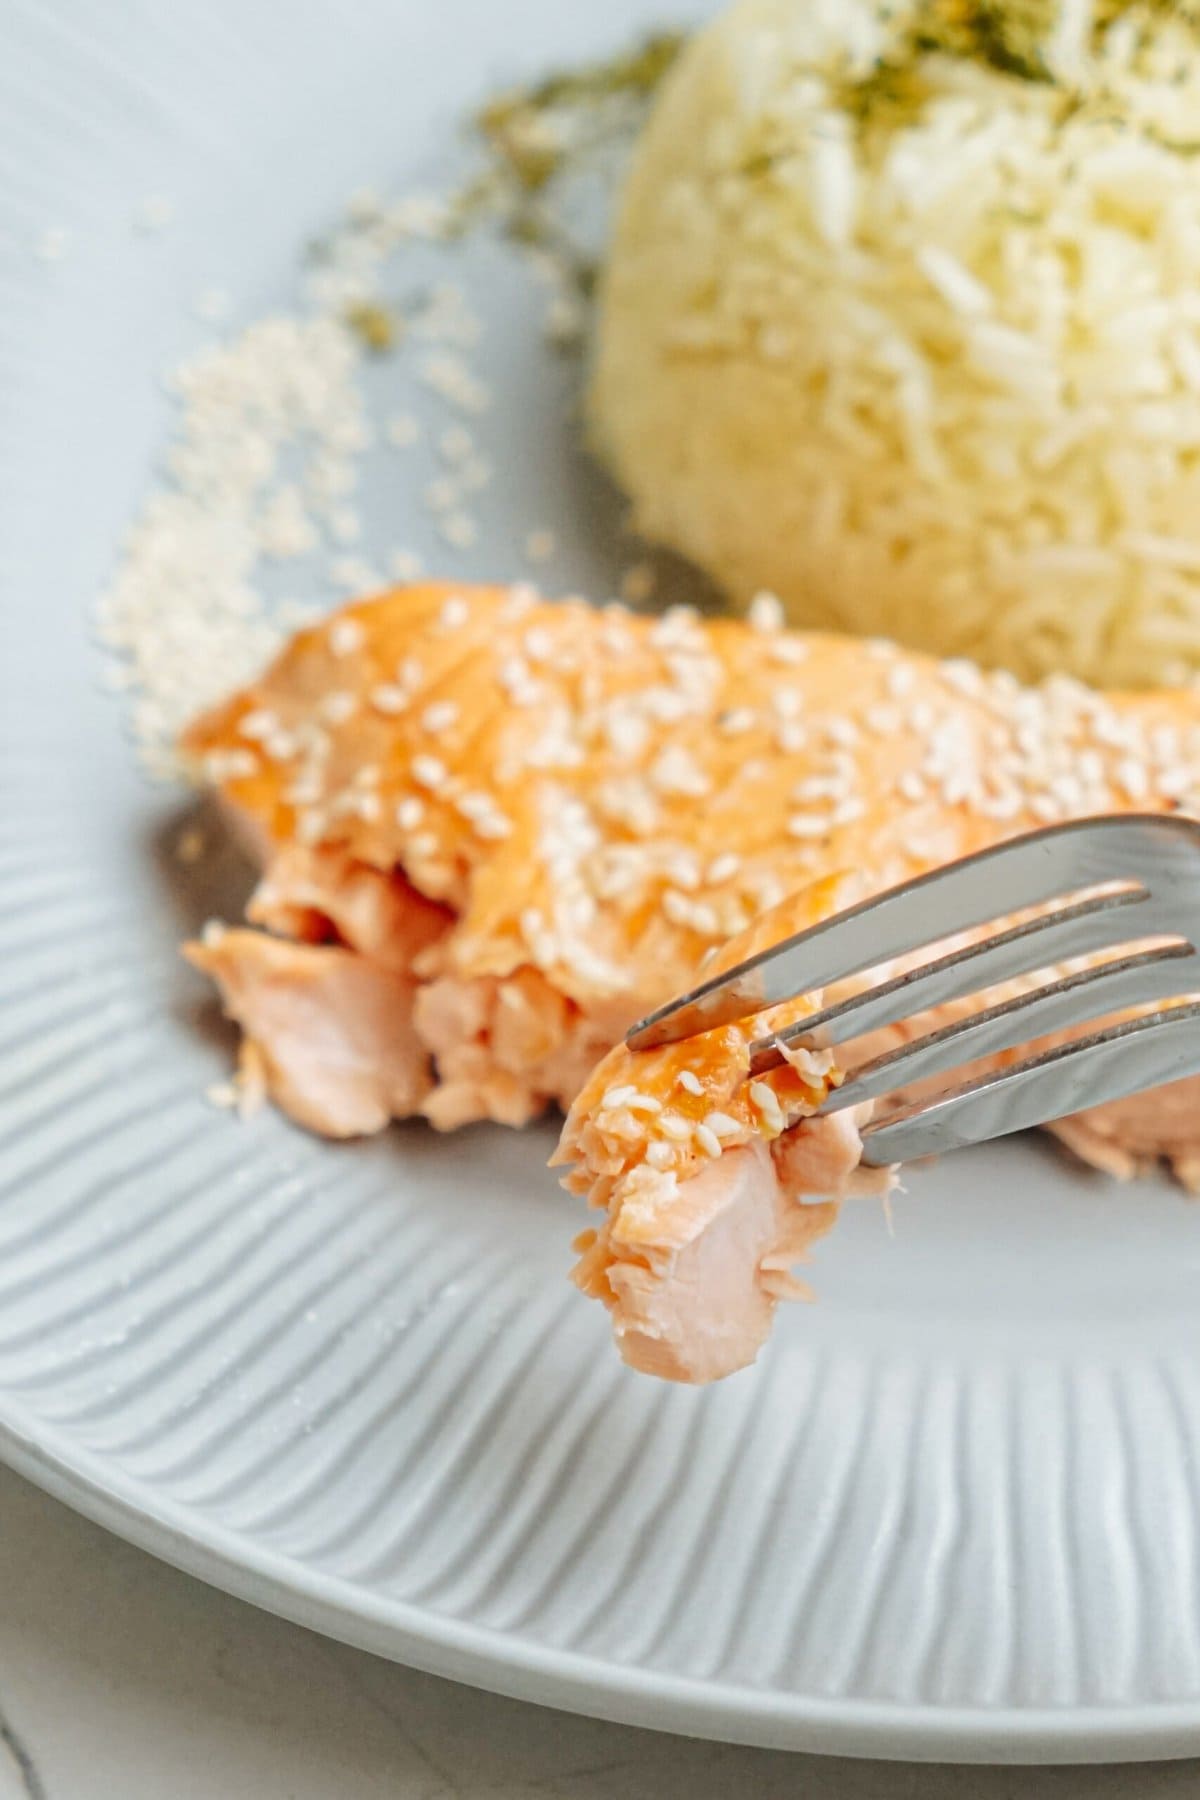 Salmon on a plate with rice and sesame seeds.